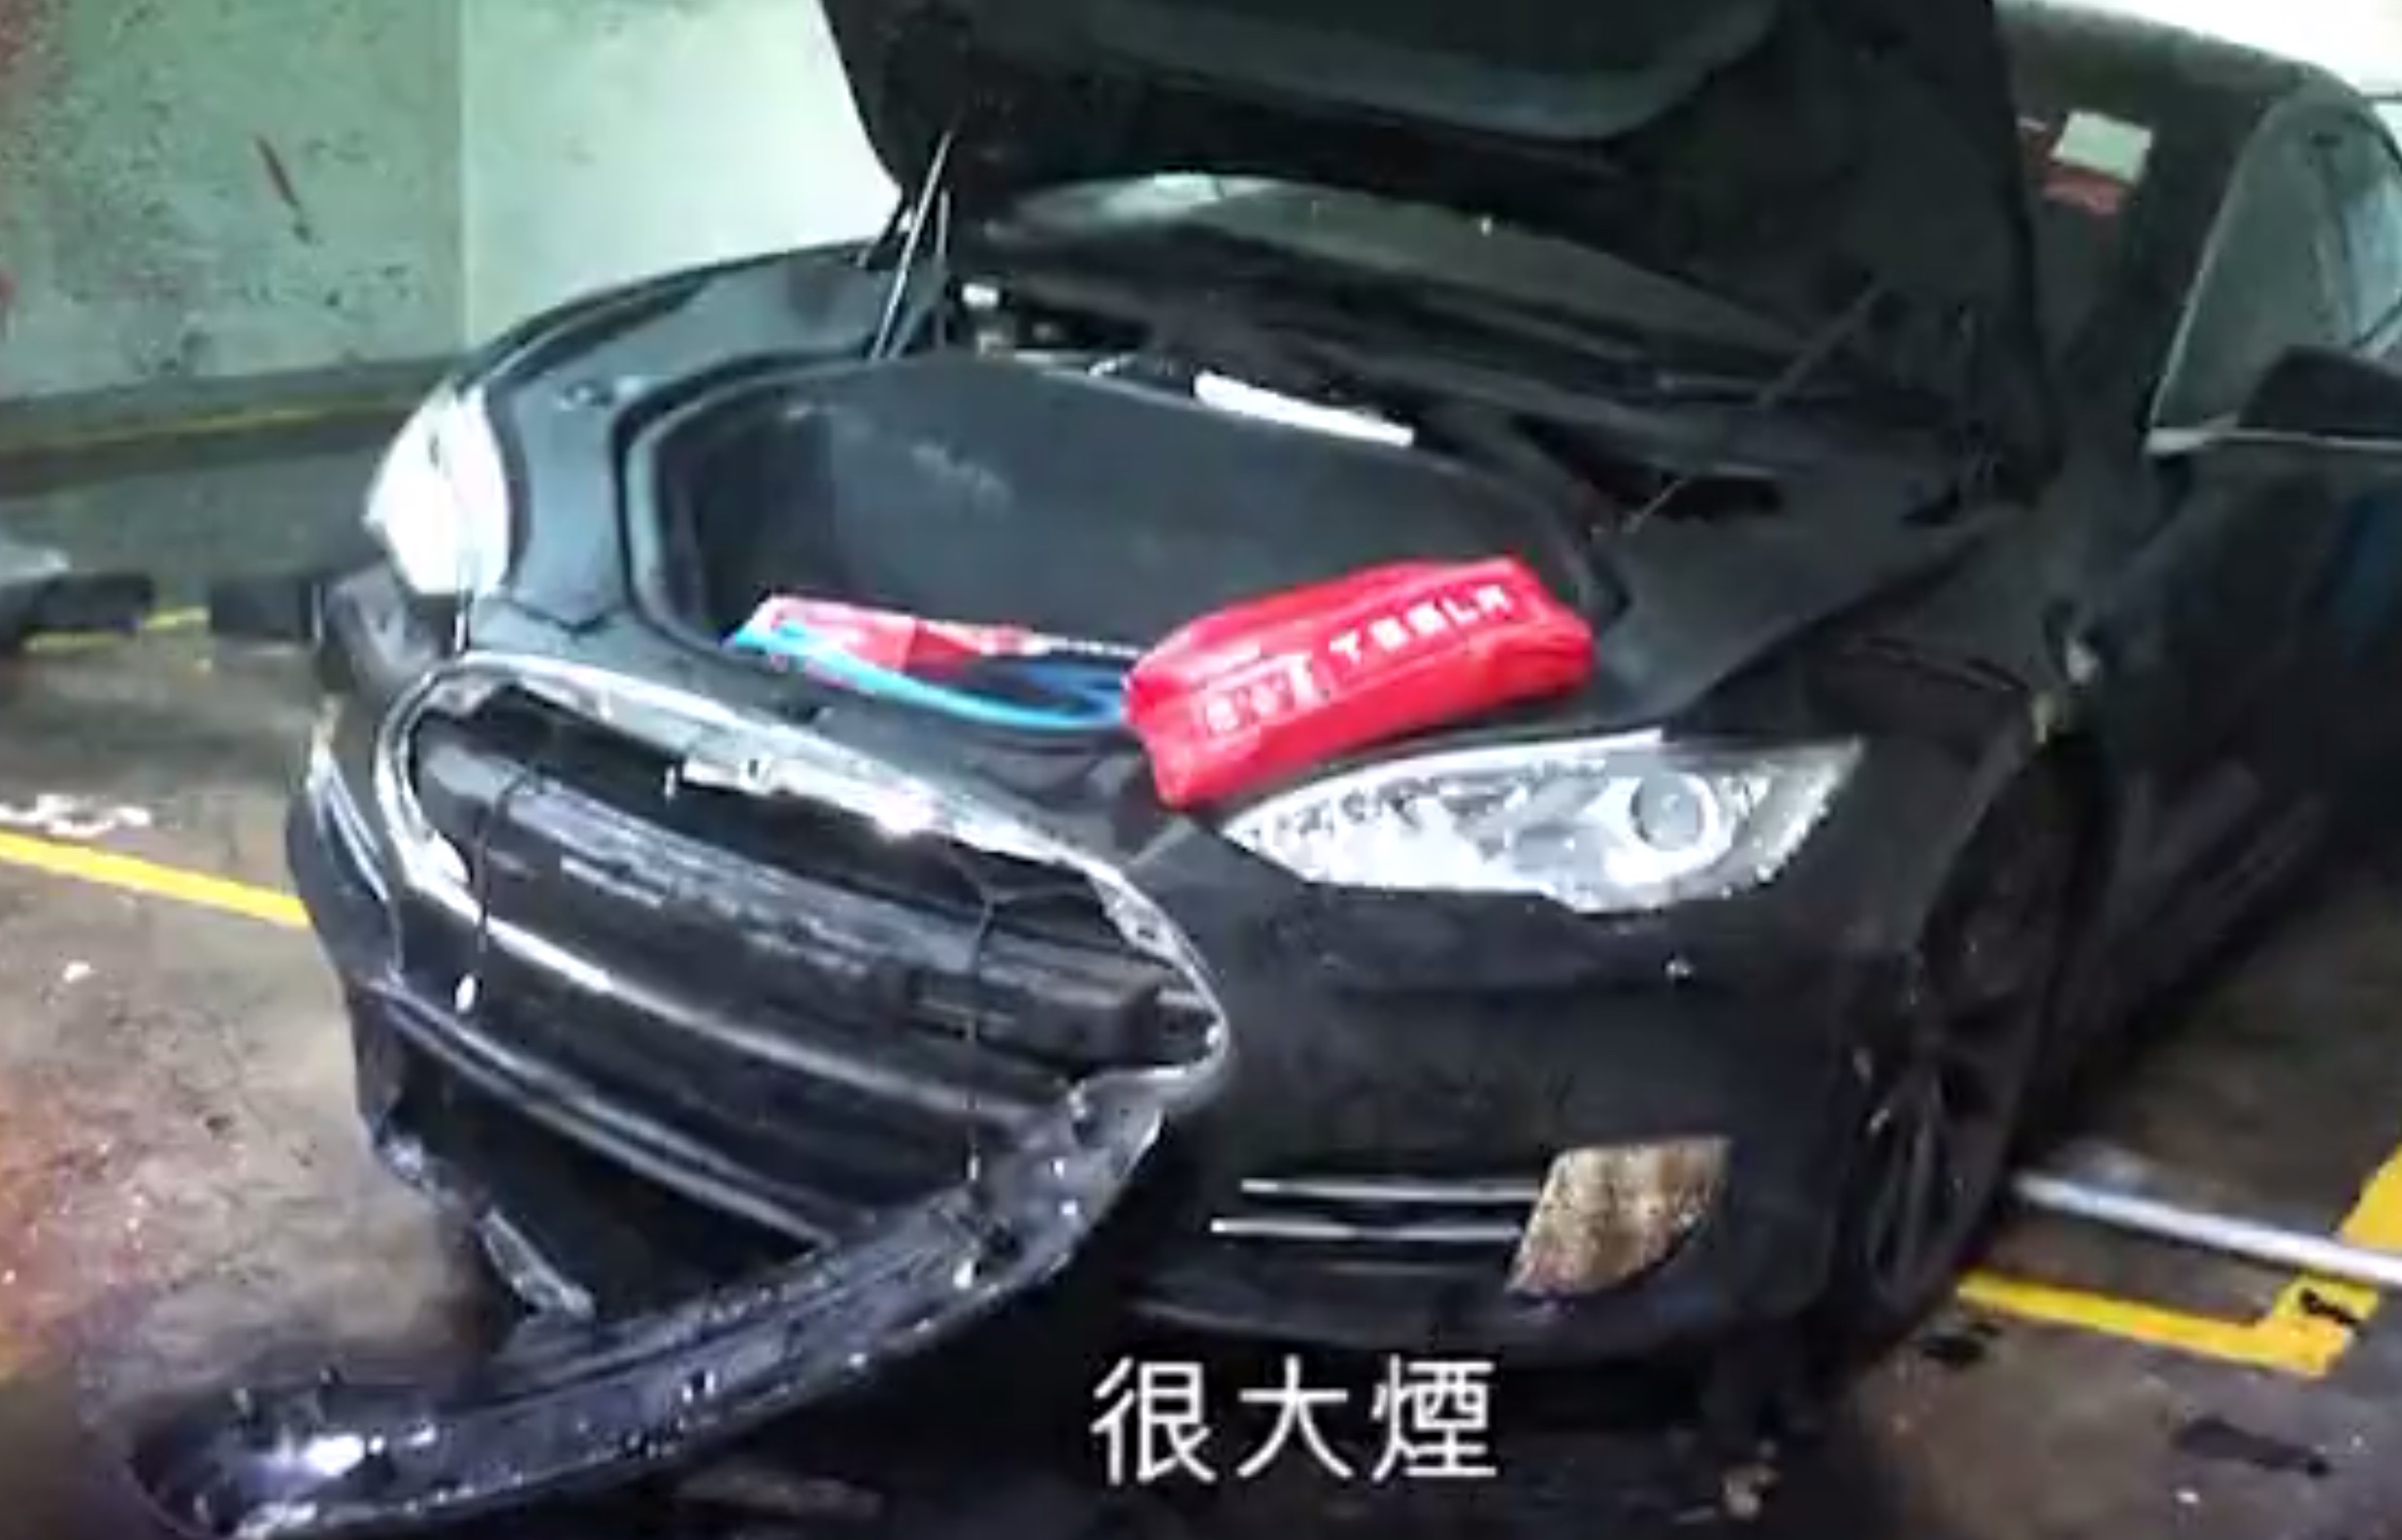 A Tesla Model S that apparently spontaneously caught fire in a Hong Kong parking lot in mid May. Screengrab via Apple Daily video.